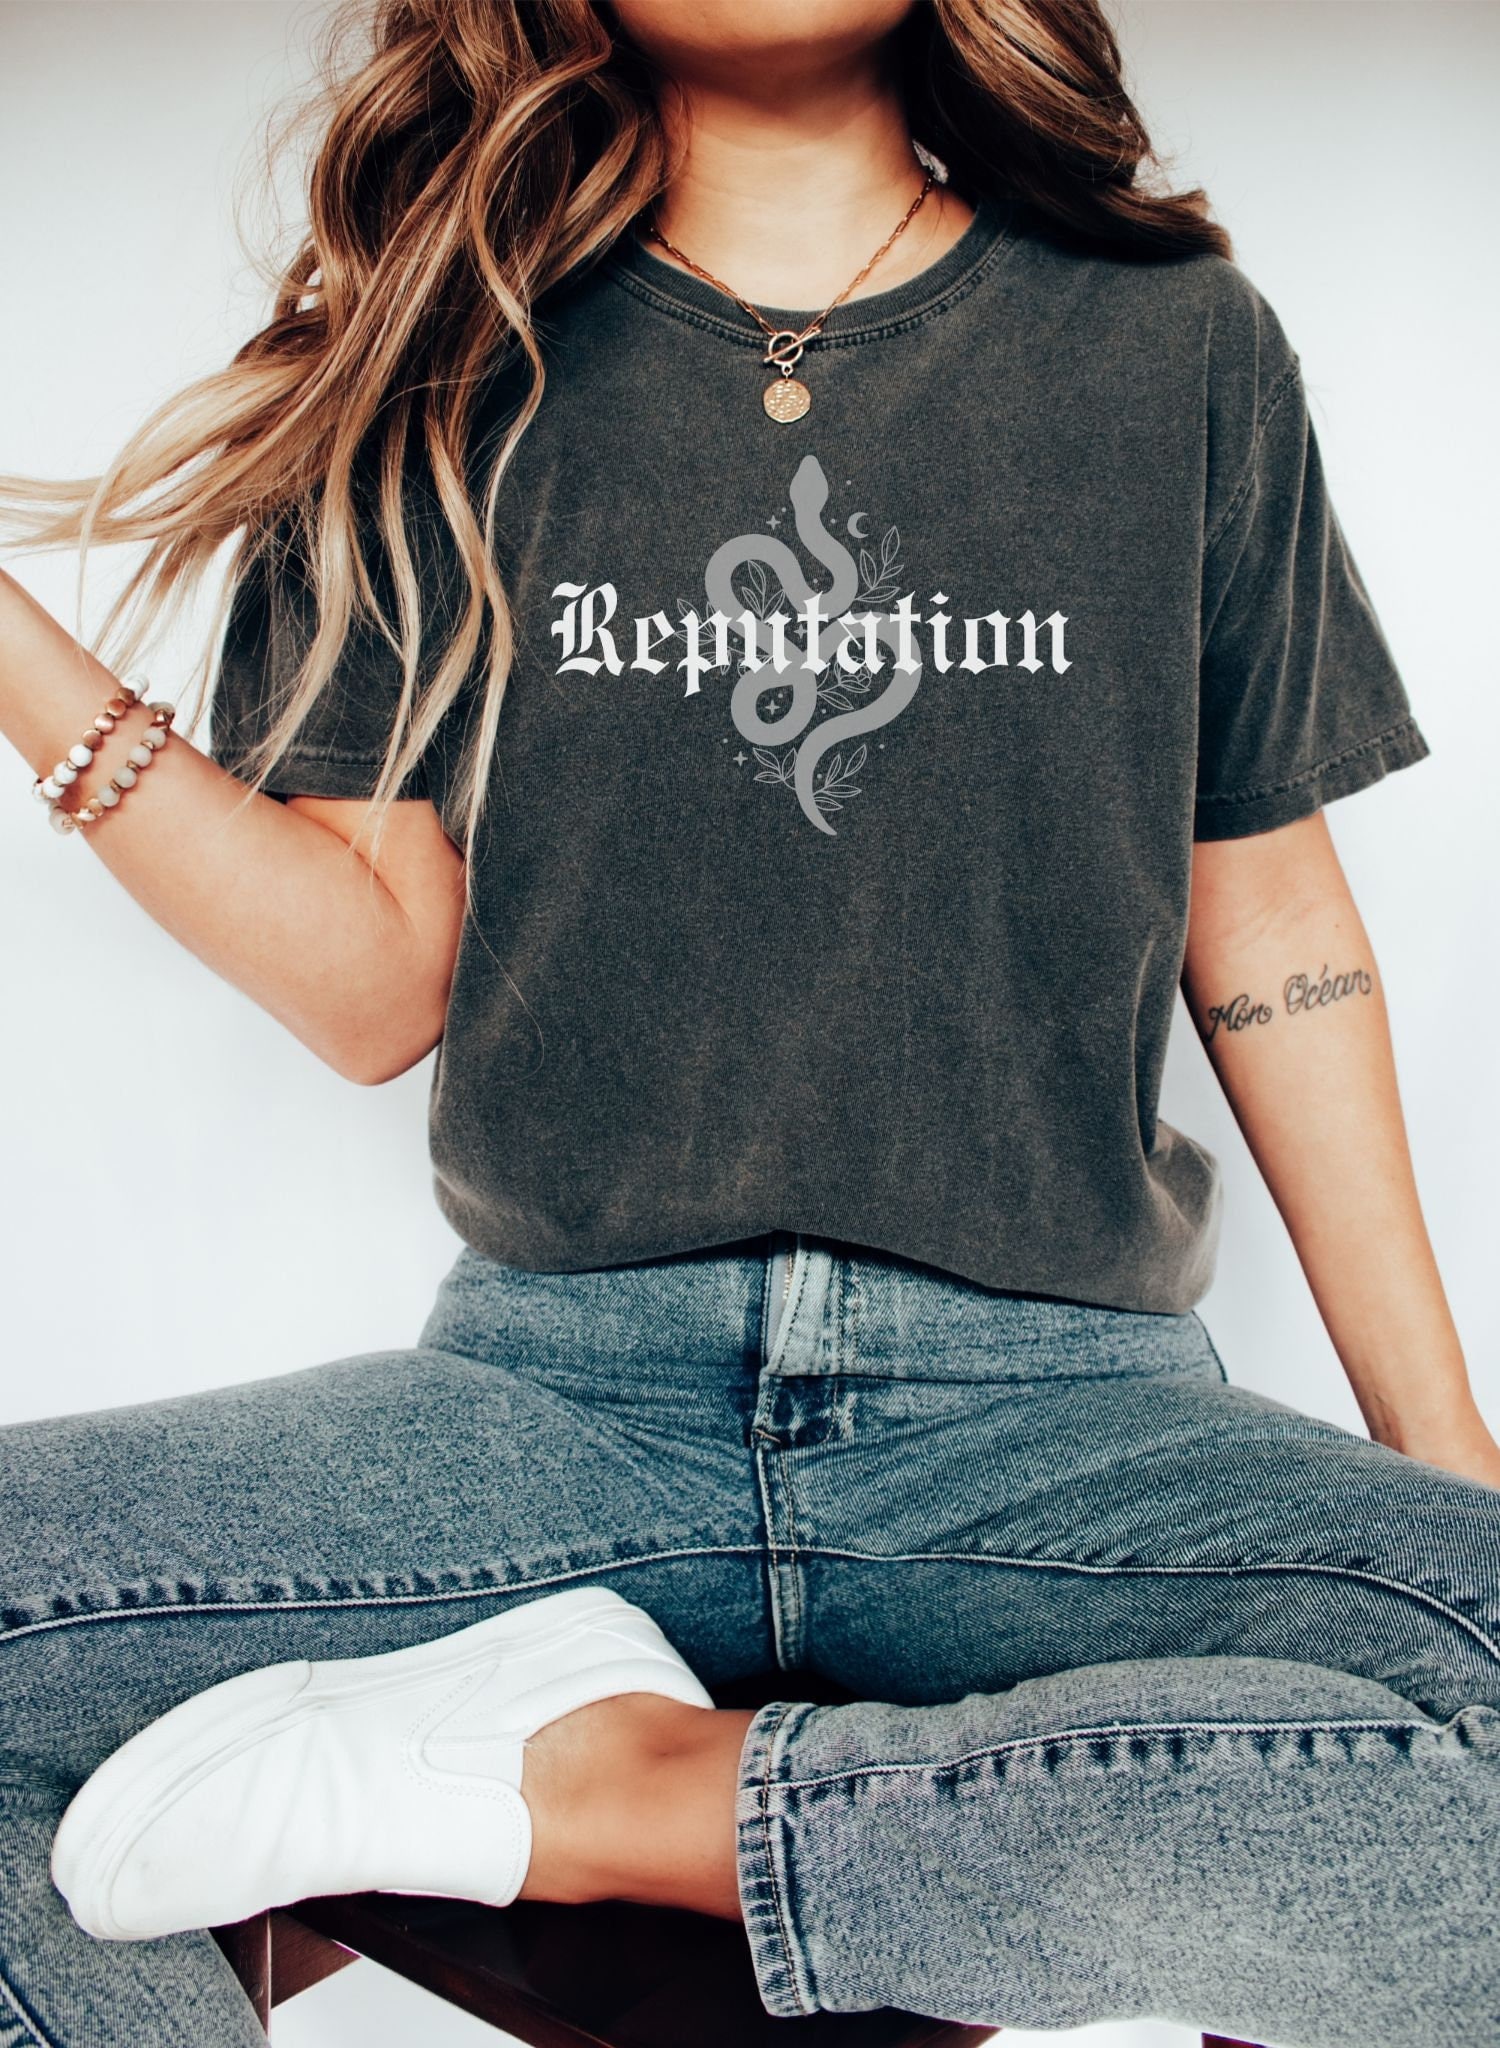 Taylor Swift Reputation Outfits Personalized Swiftie In My Reputation Era  All Over Printed Baseball Jersey Shirt Custom Name And Number The Eras Tour  Gift For Fan - Laughinks